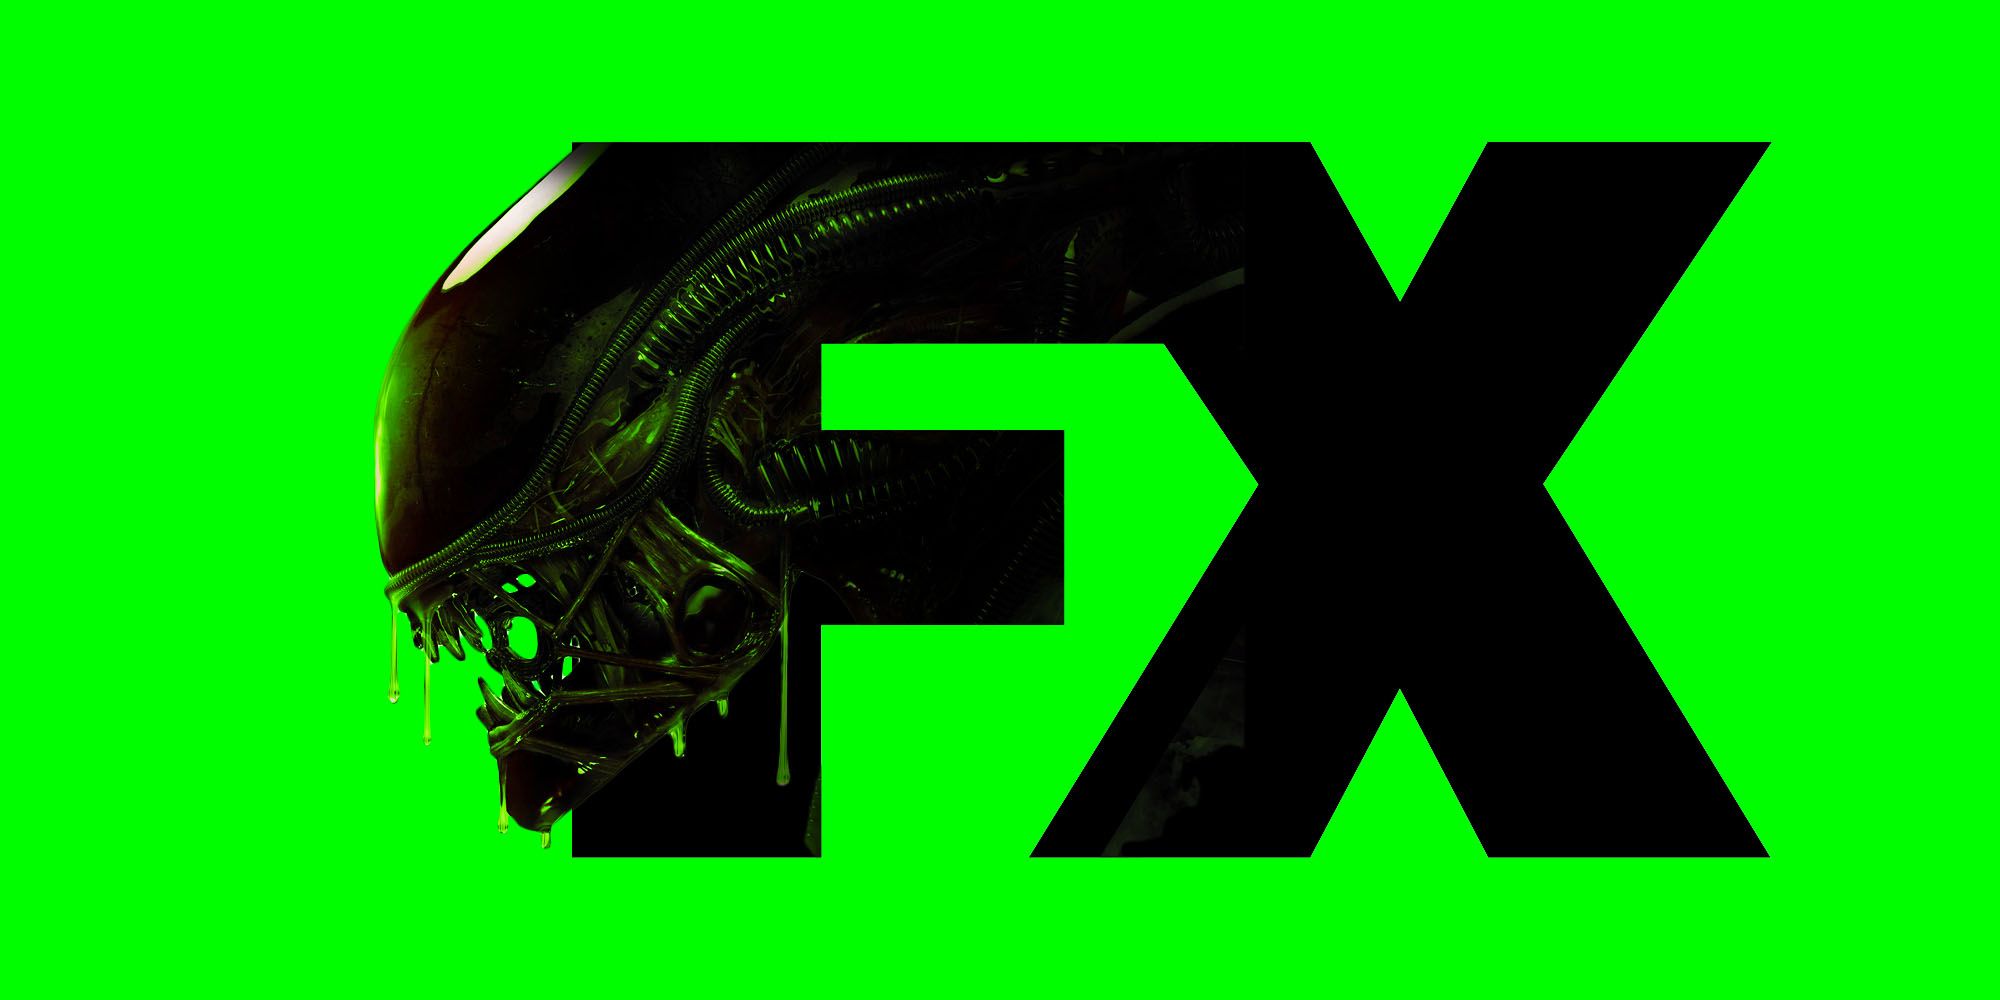 An edited image of a Xenomorph popping out of the FX logo in front of a green background